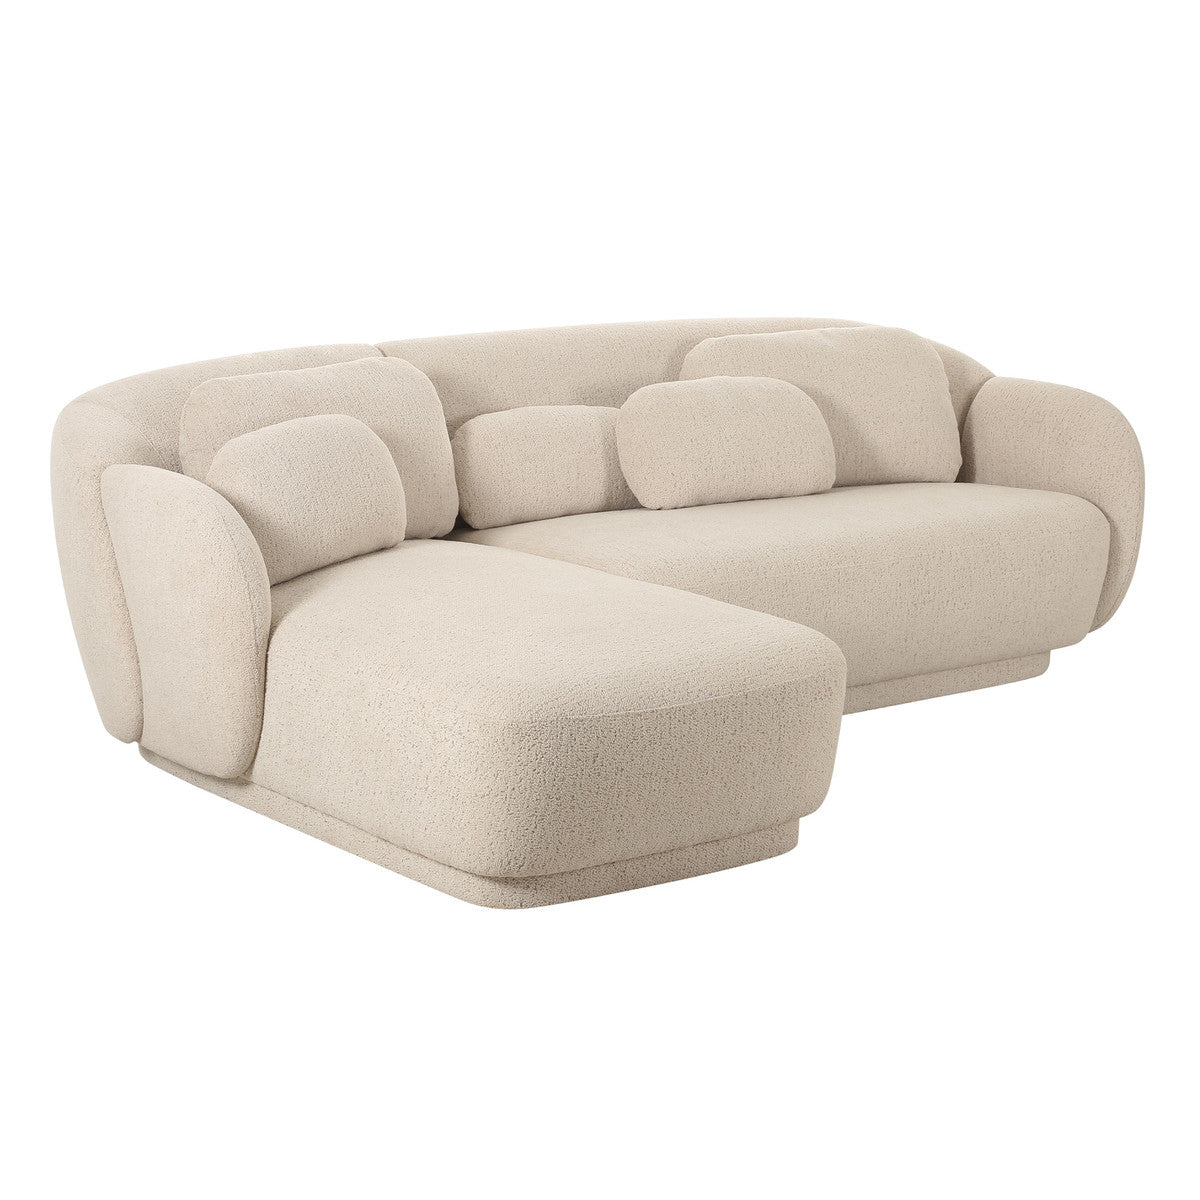 Covet Cream Boucle Sectional - LAF